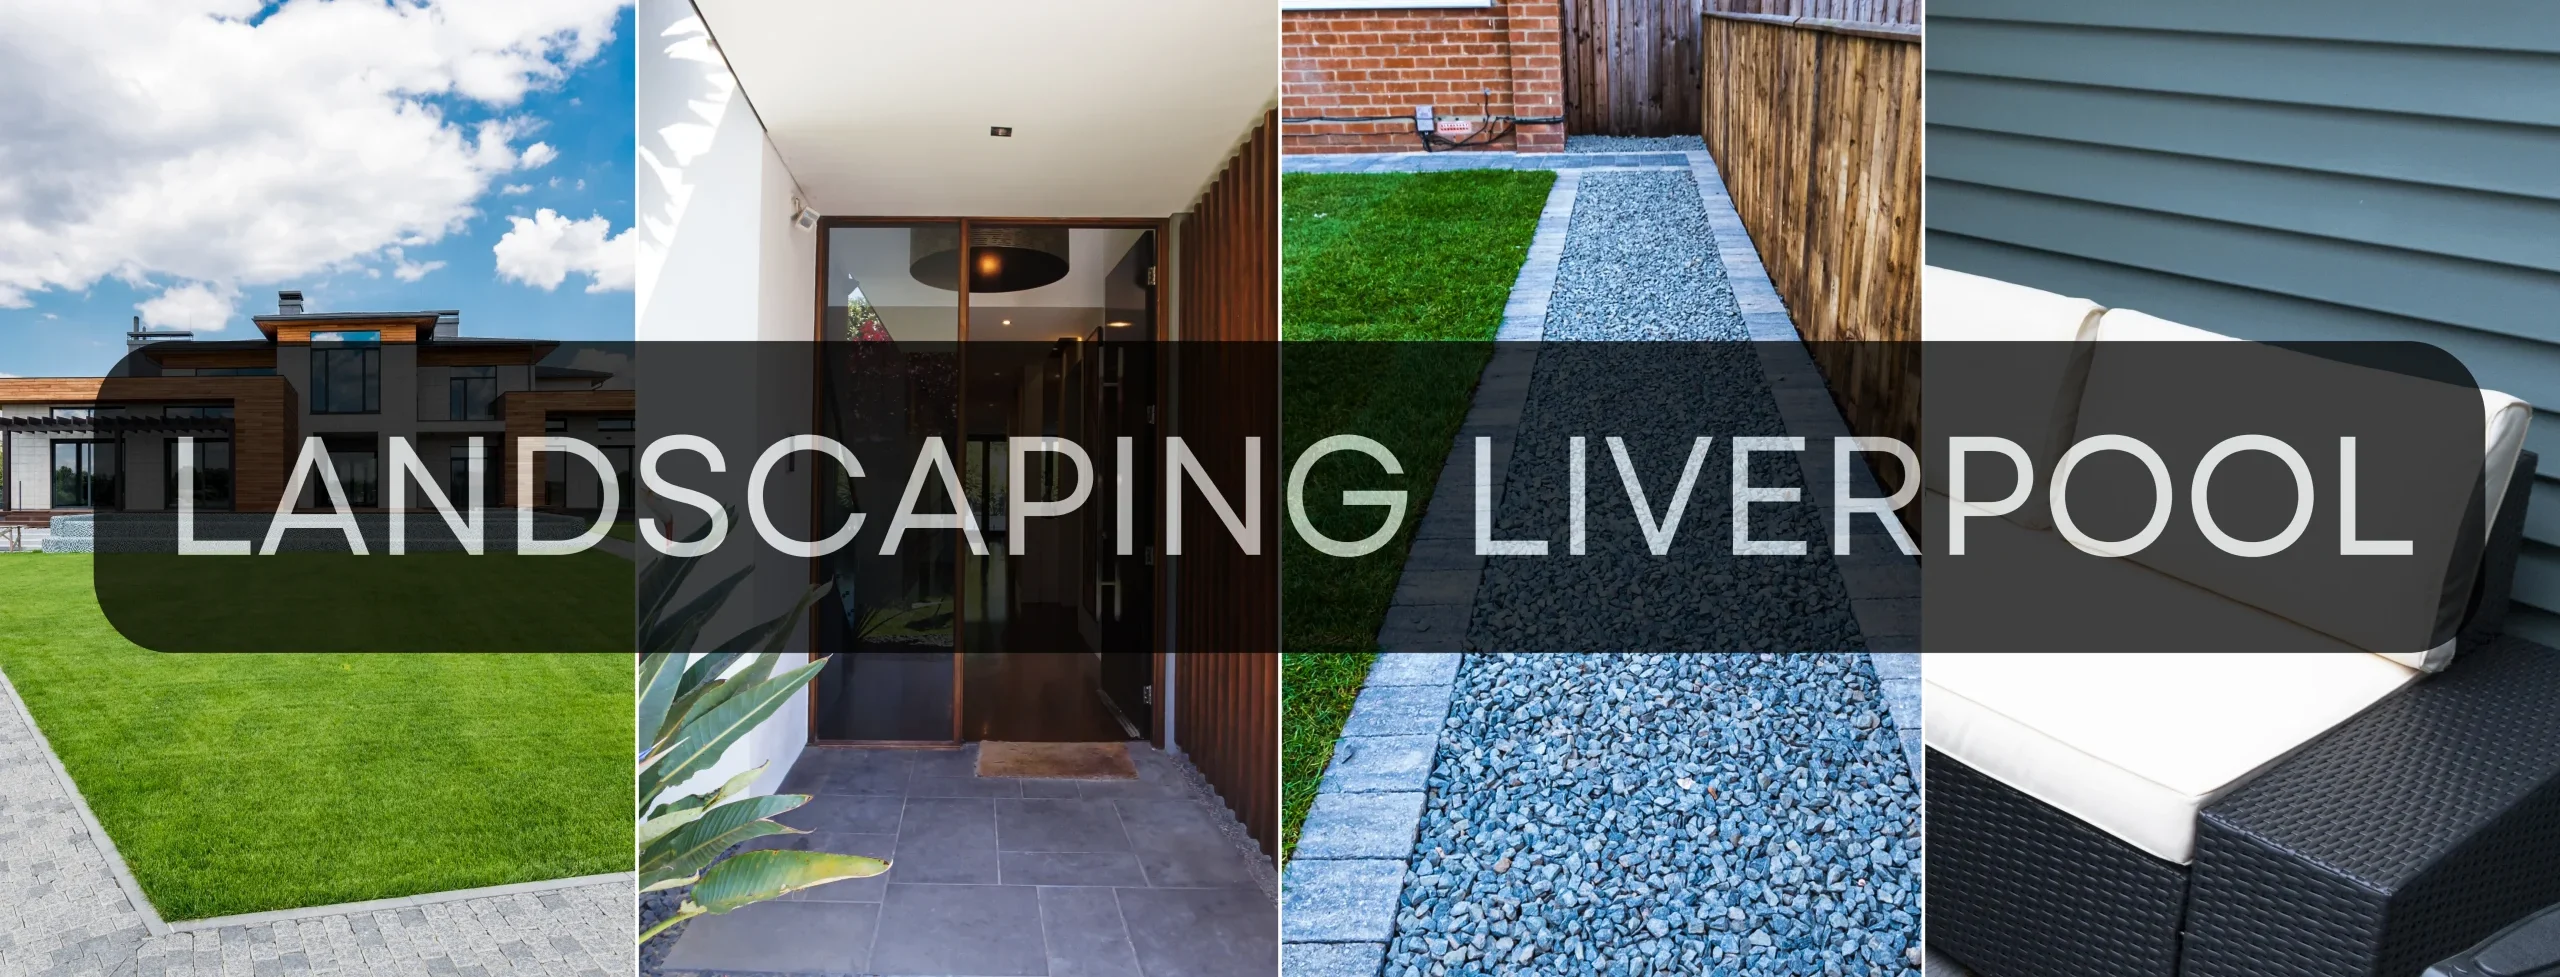 Landscaping Liverpool by UK Landscaping services